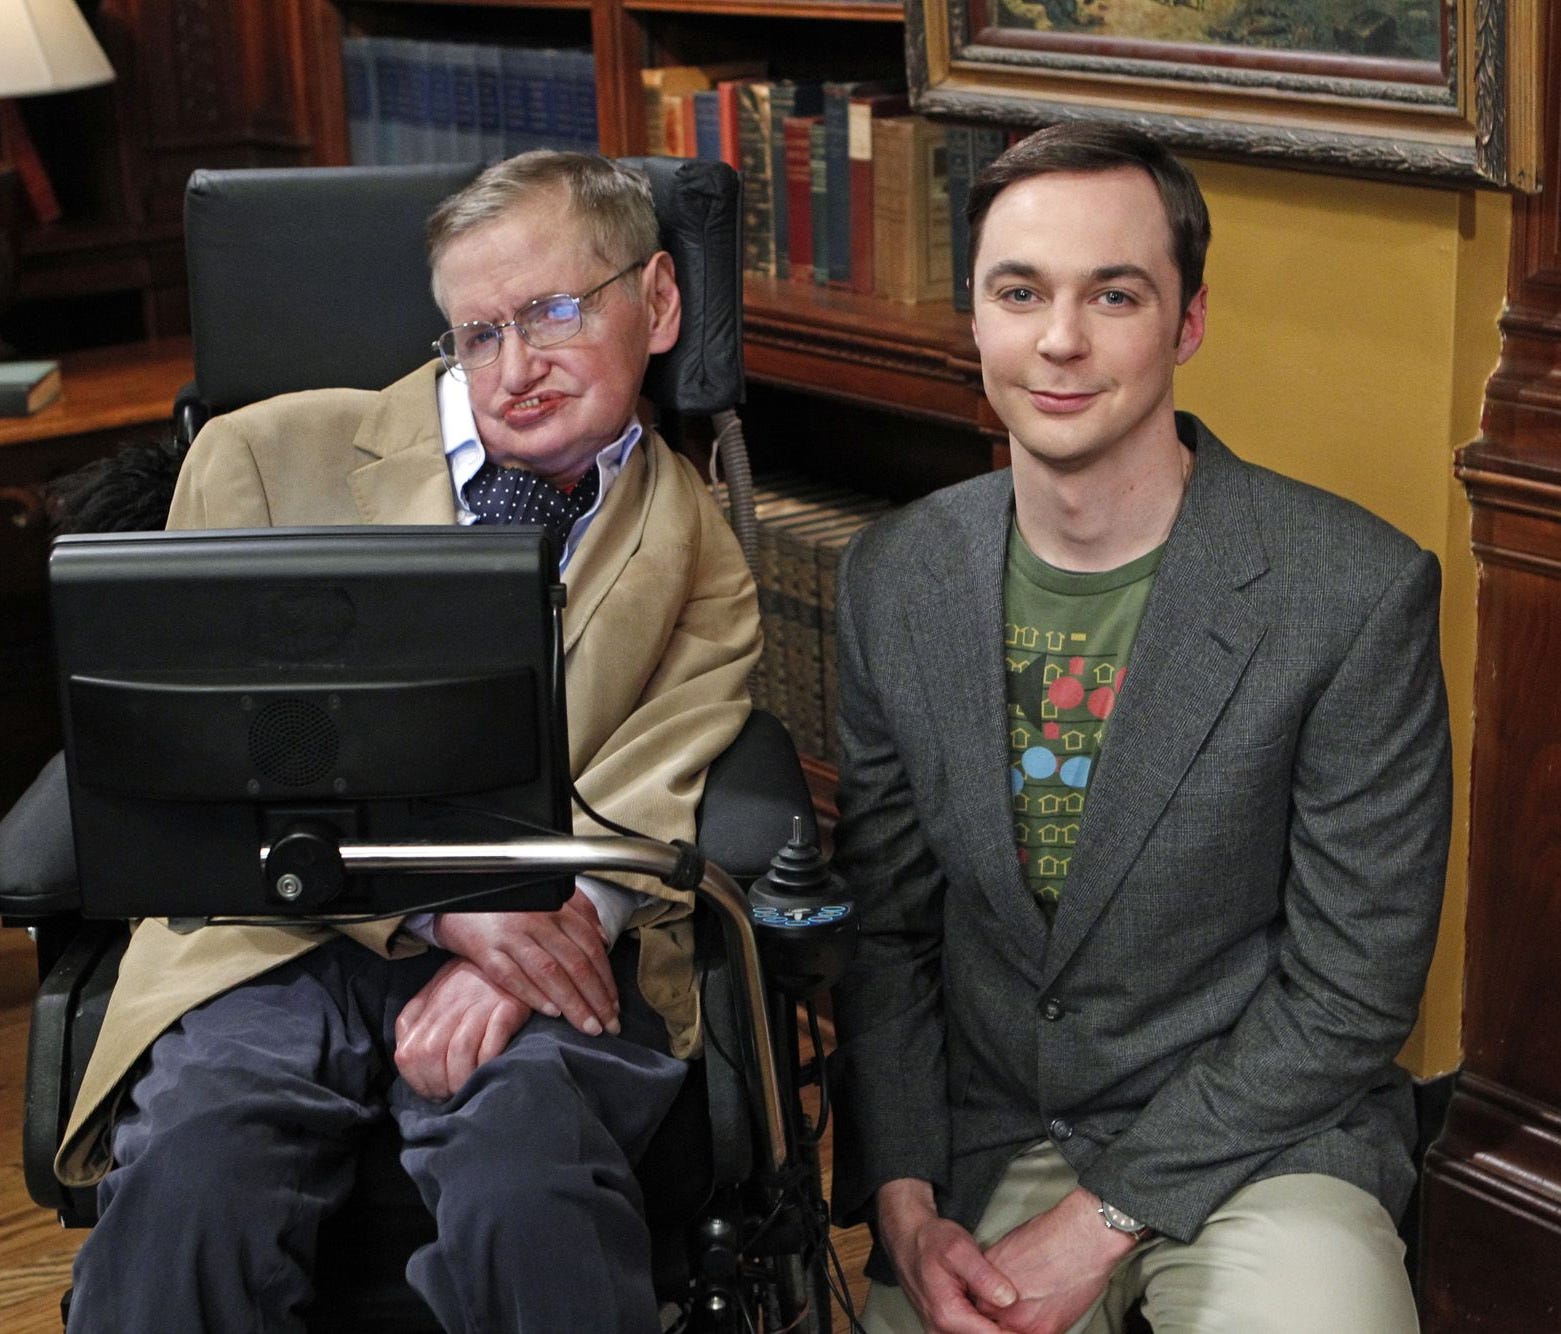 Stephen Hawking (left) and Jim Parsons filming an episode of 'The Big Bang Theory.'